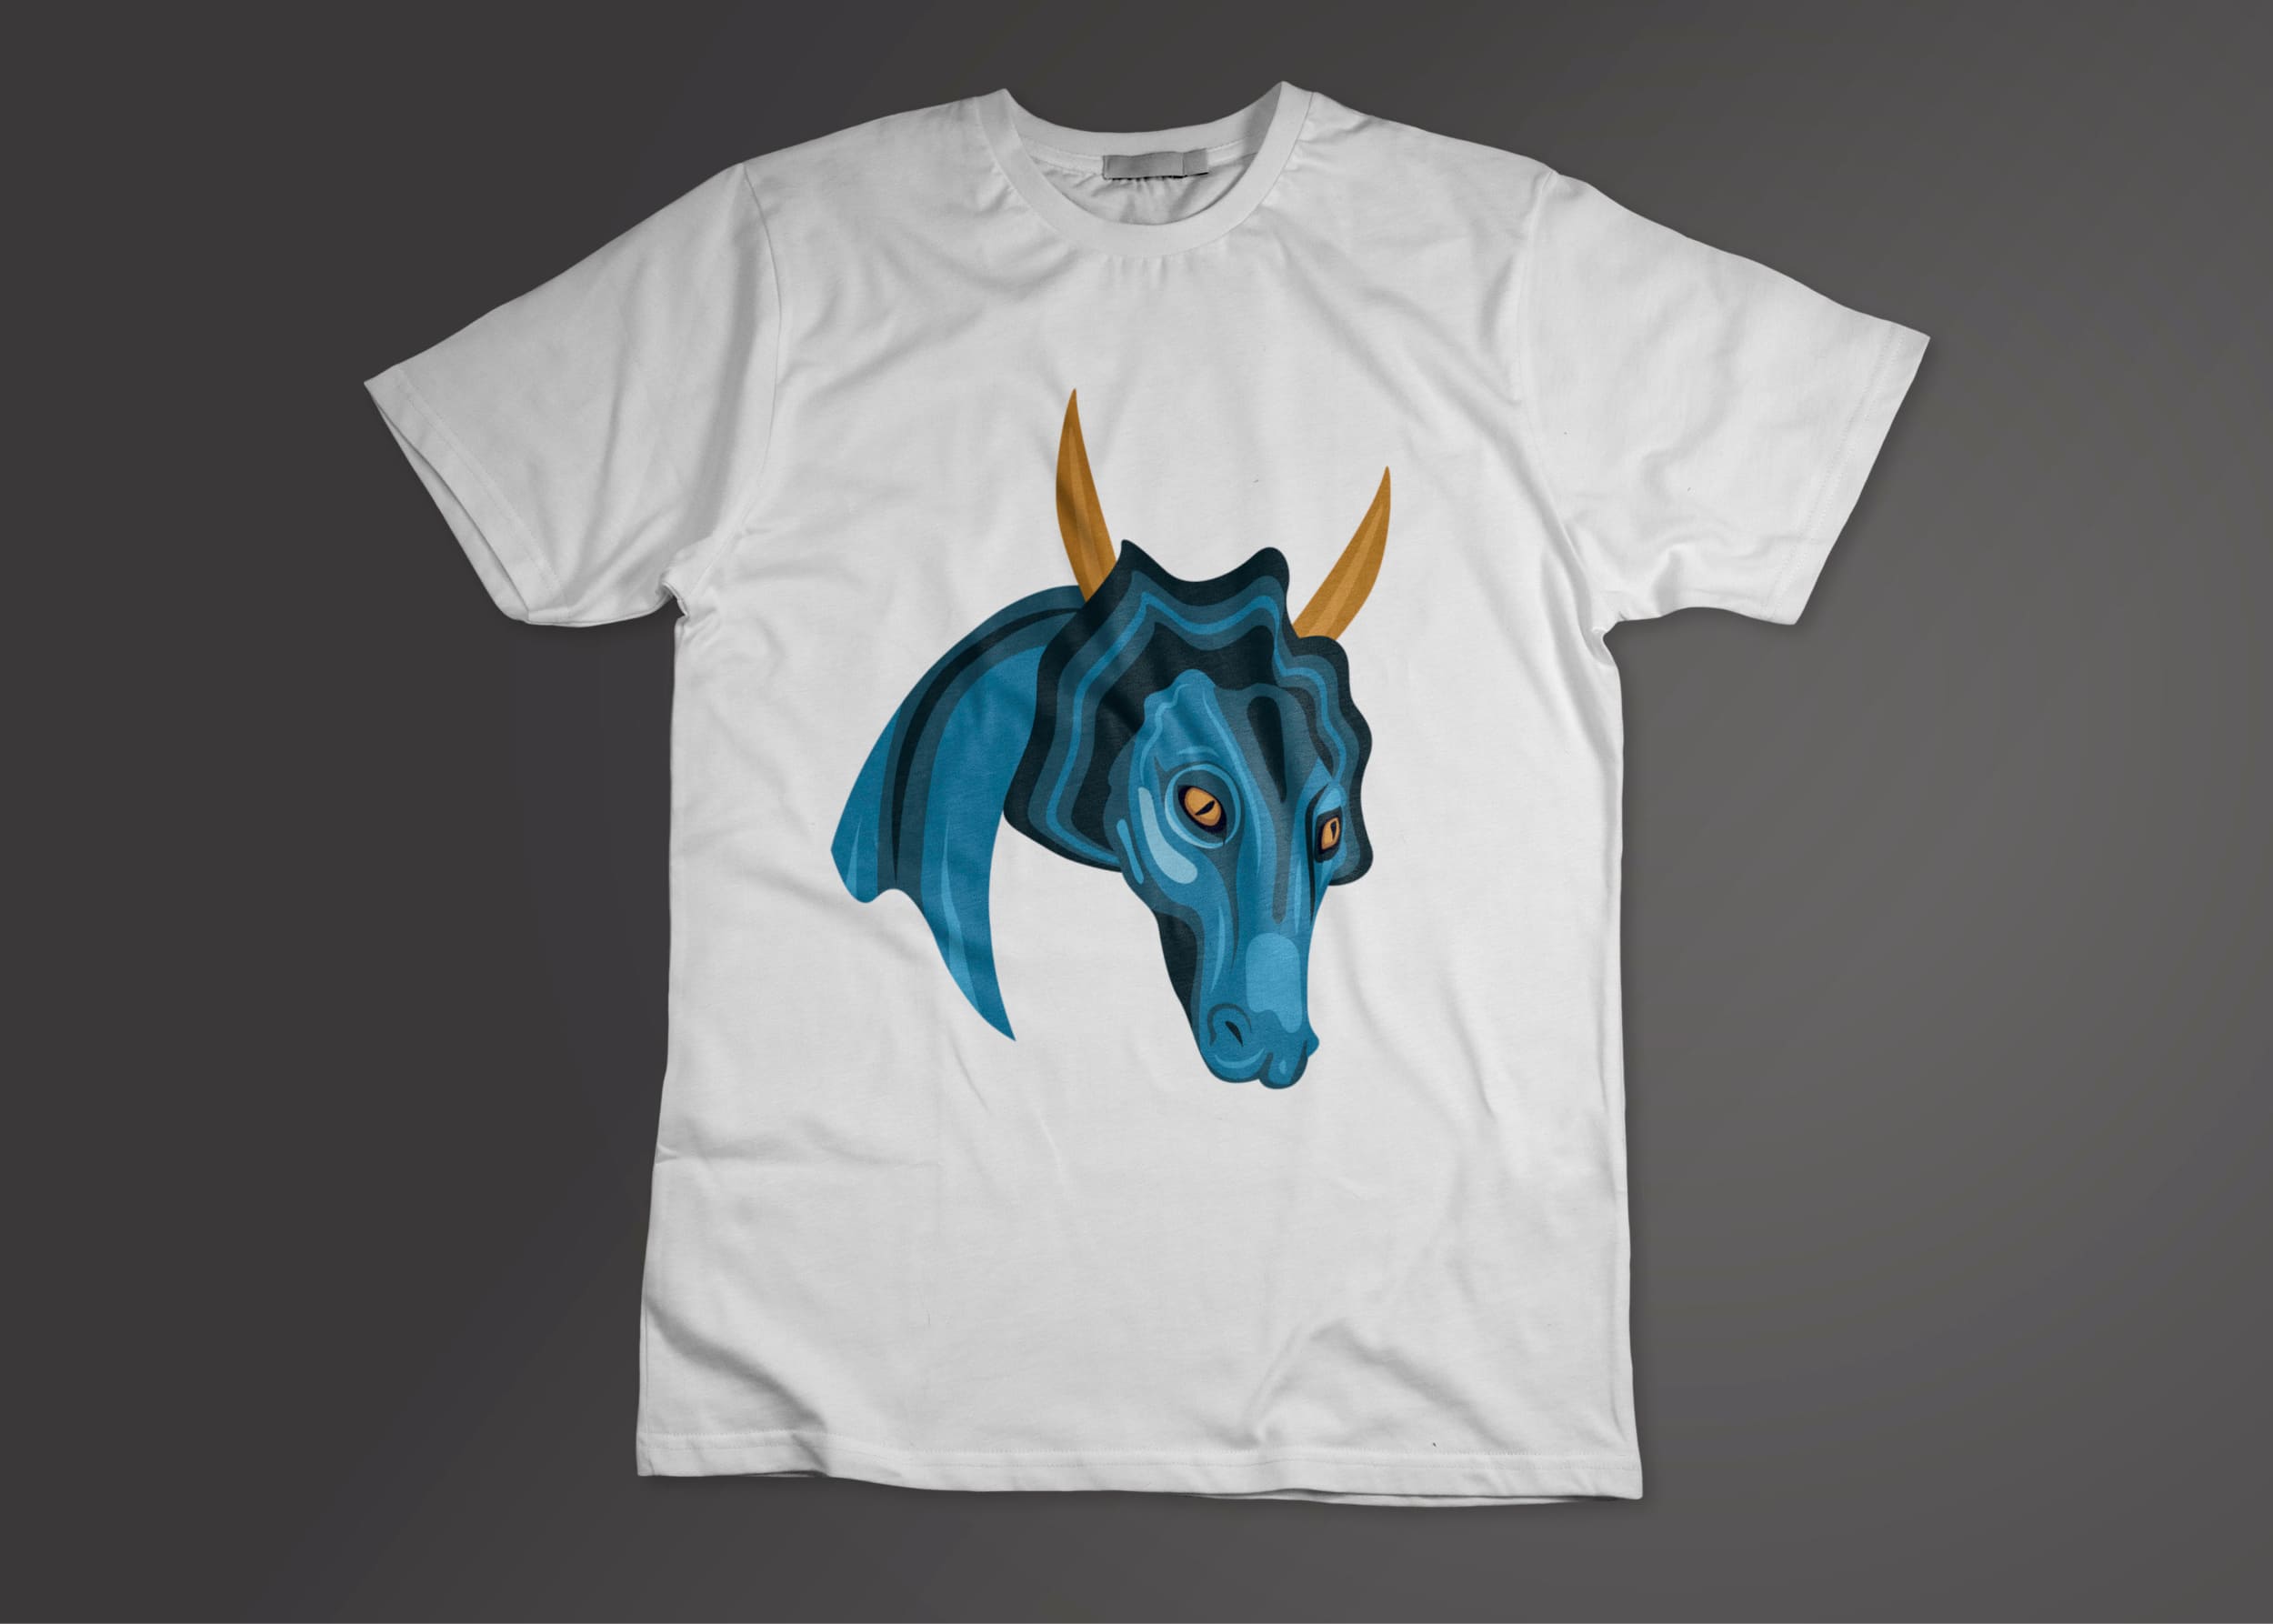 White T-shirt with a blue dragon head on a dark gray background.